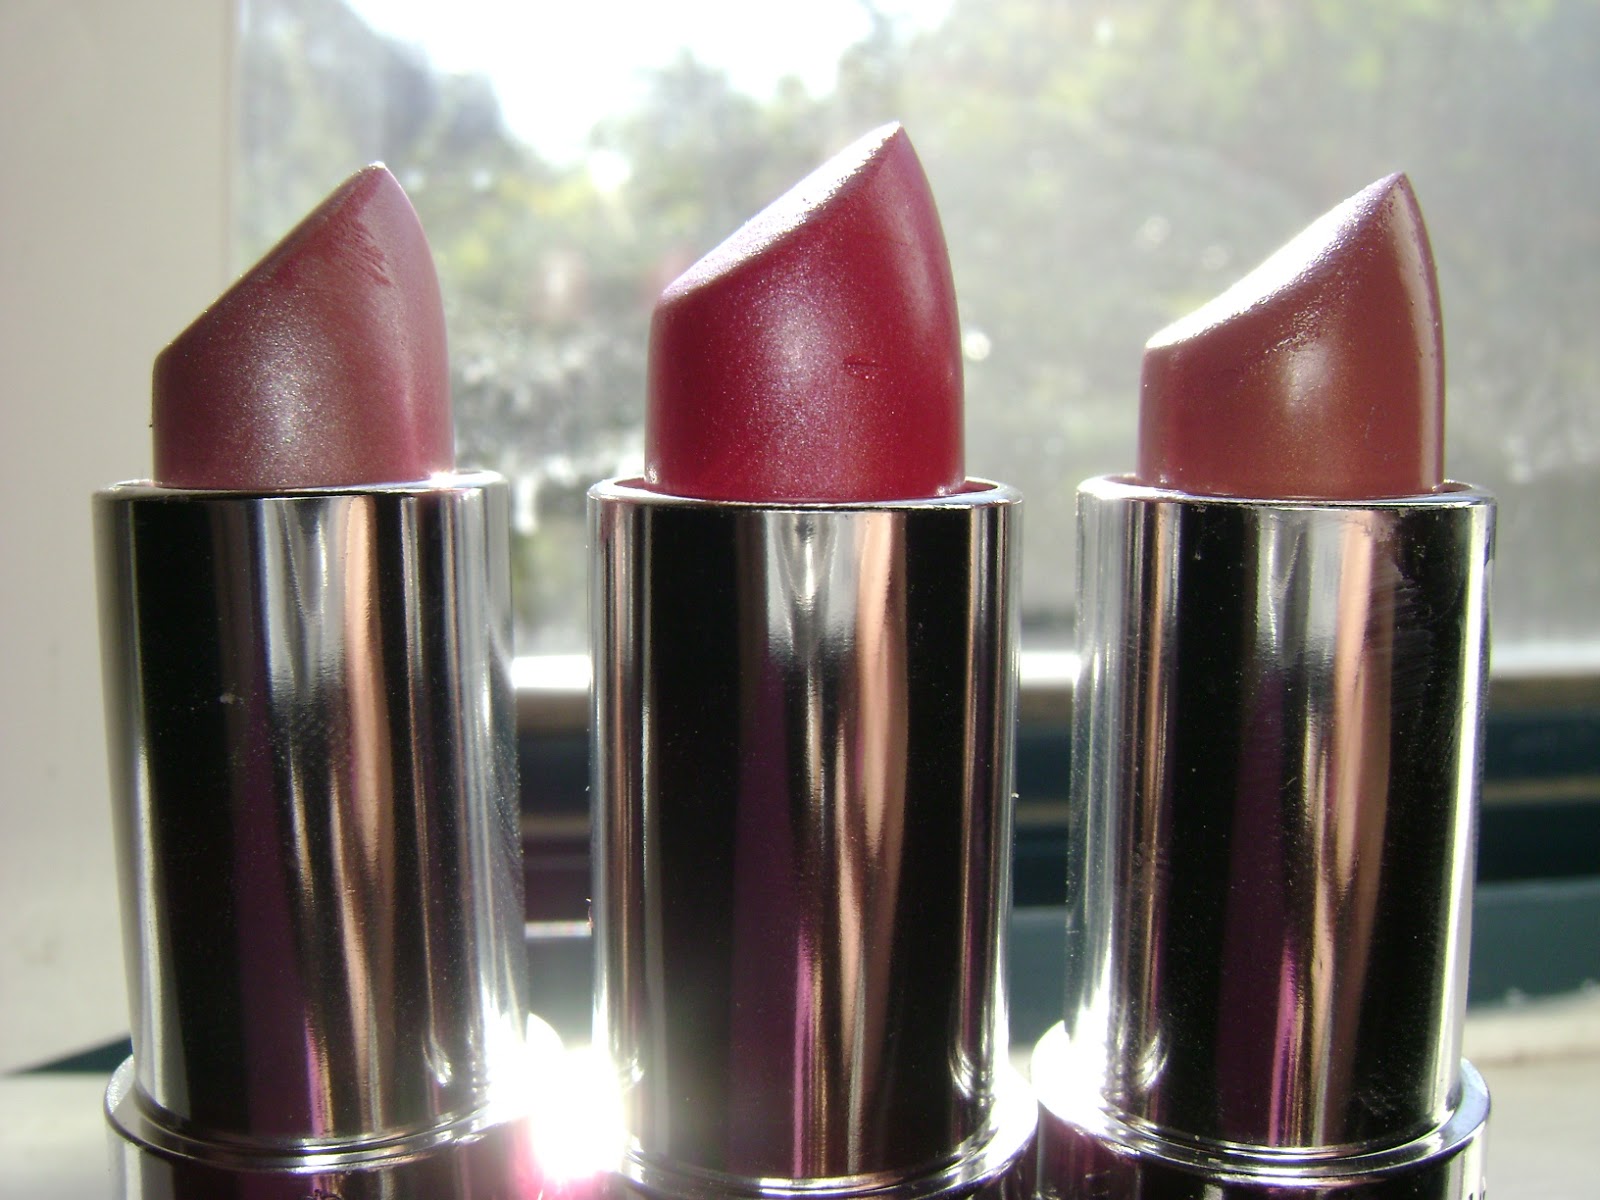 Beauty Research Review Rimmel Lasting Finish Lipstick Part 1 Of 3.